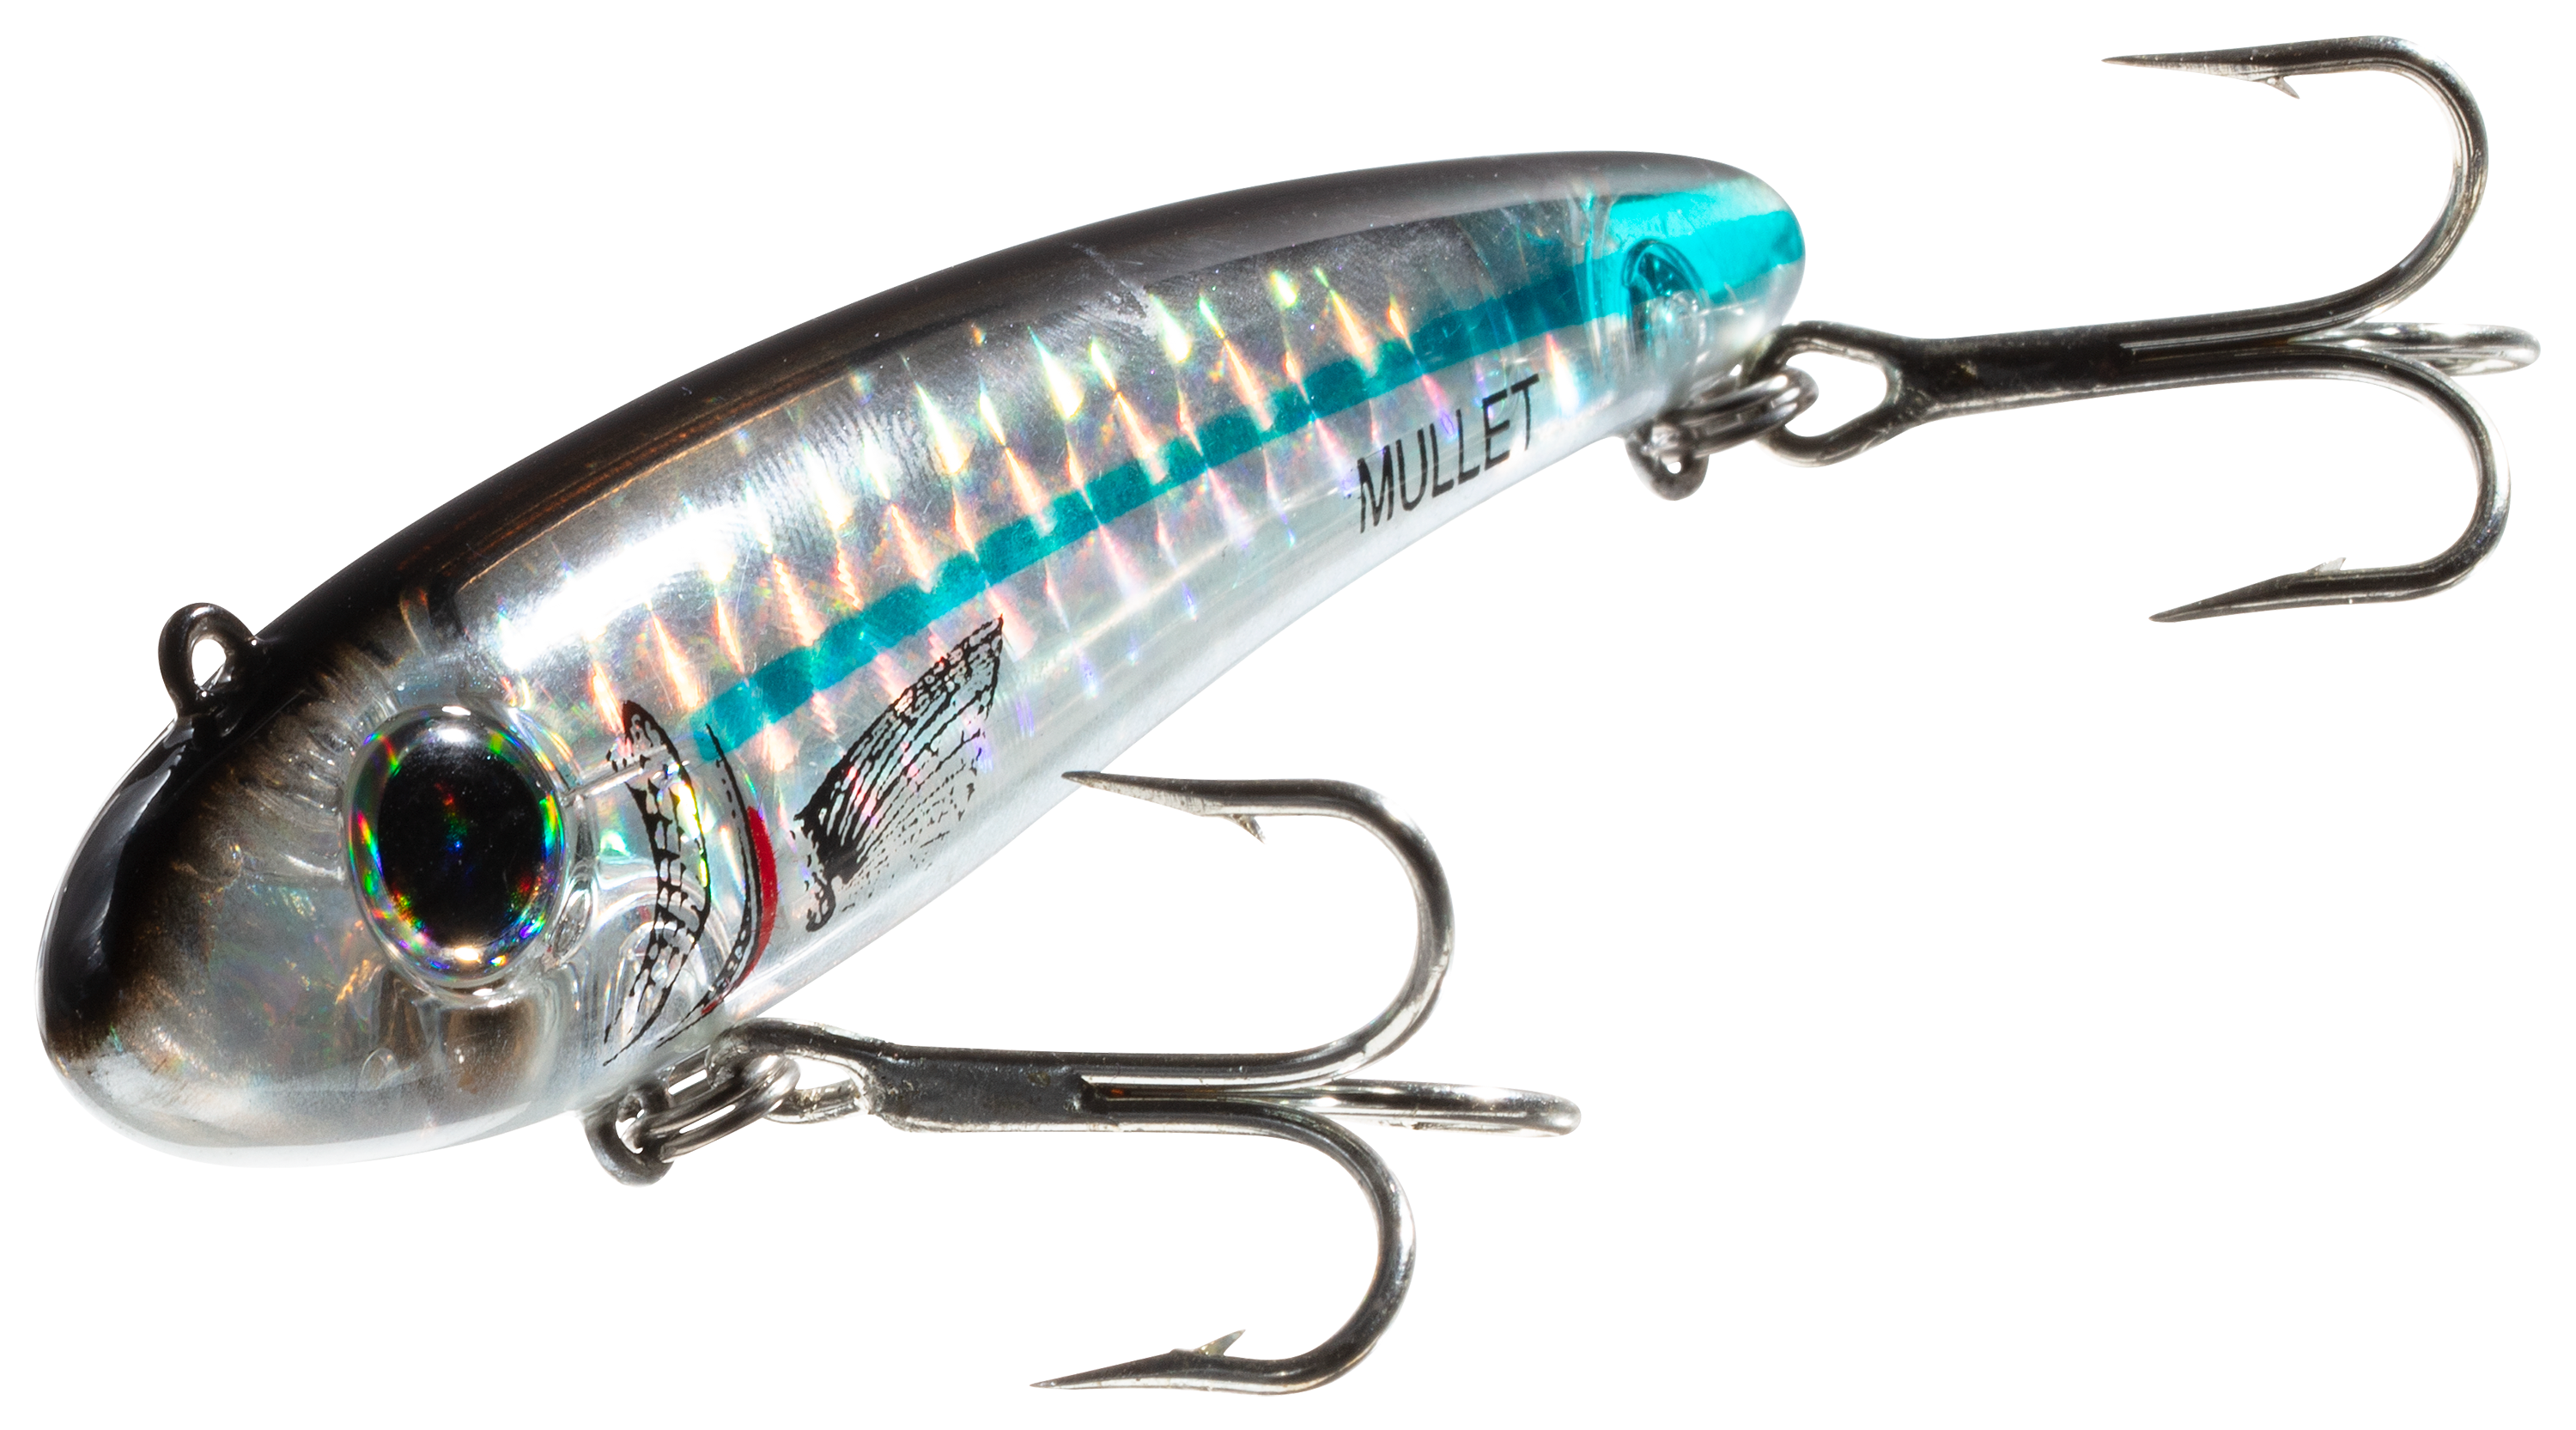 Lures Mullet Slow-Sinking Twitch / Walking Saltwater Fishing Lure -  Excellent for Speckled Trout, Redfish, Stripers and More, 3 1/2 Inch, 5/8  Ounce